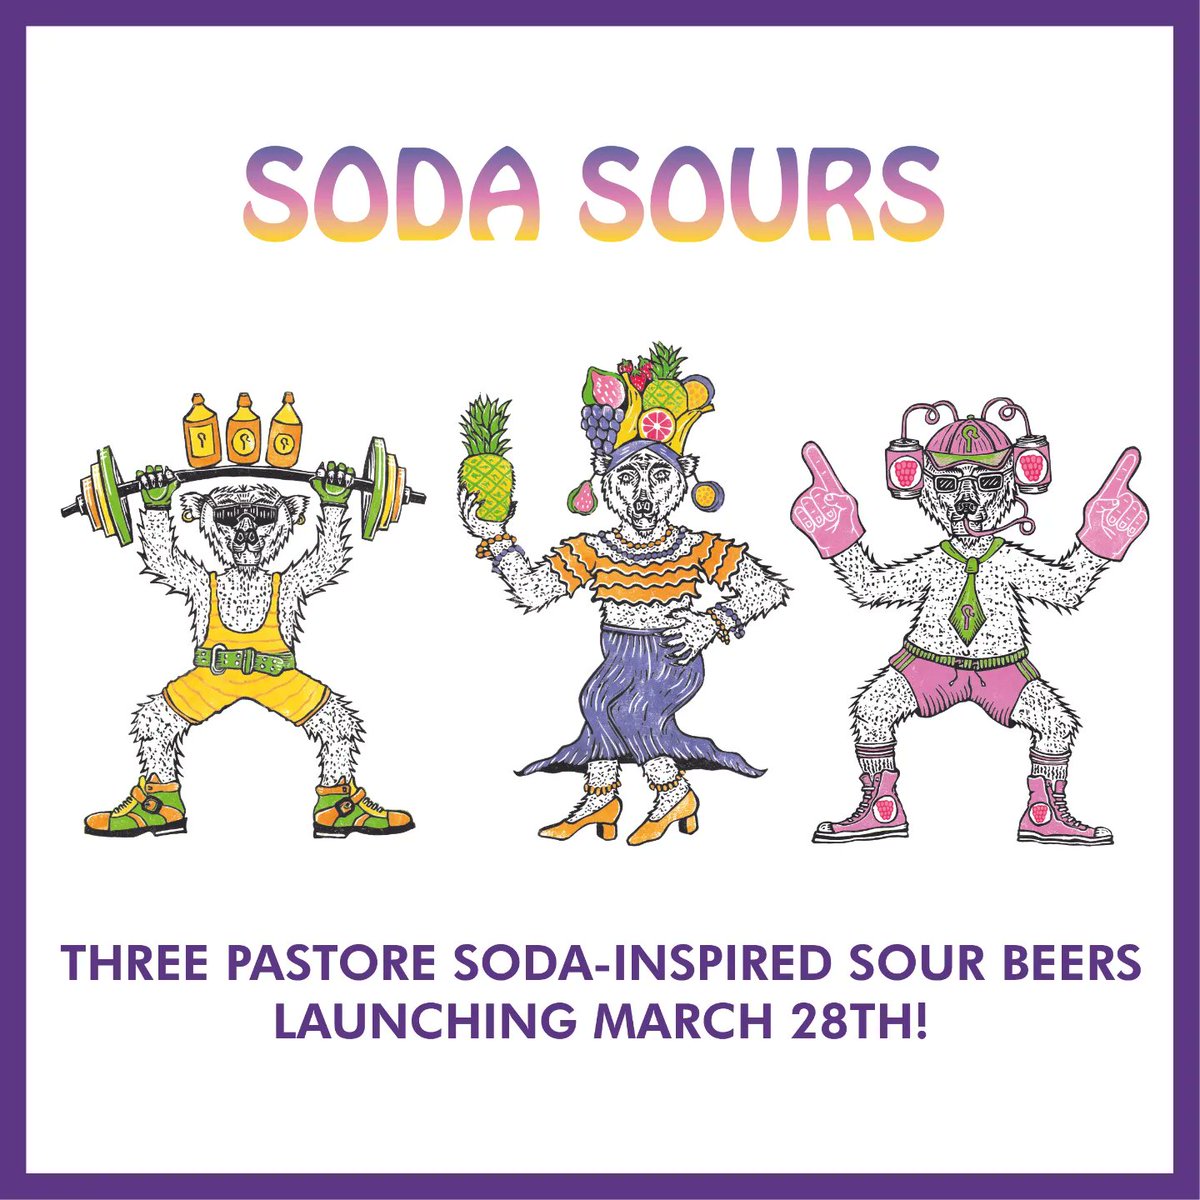 Soda Sours Rio de Pastore A tropical soda inspired sour fermented with our fresh sour mixed culture along with mangoes, oranges, passion fruit, guavas & apricots ☀️🏖